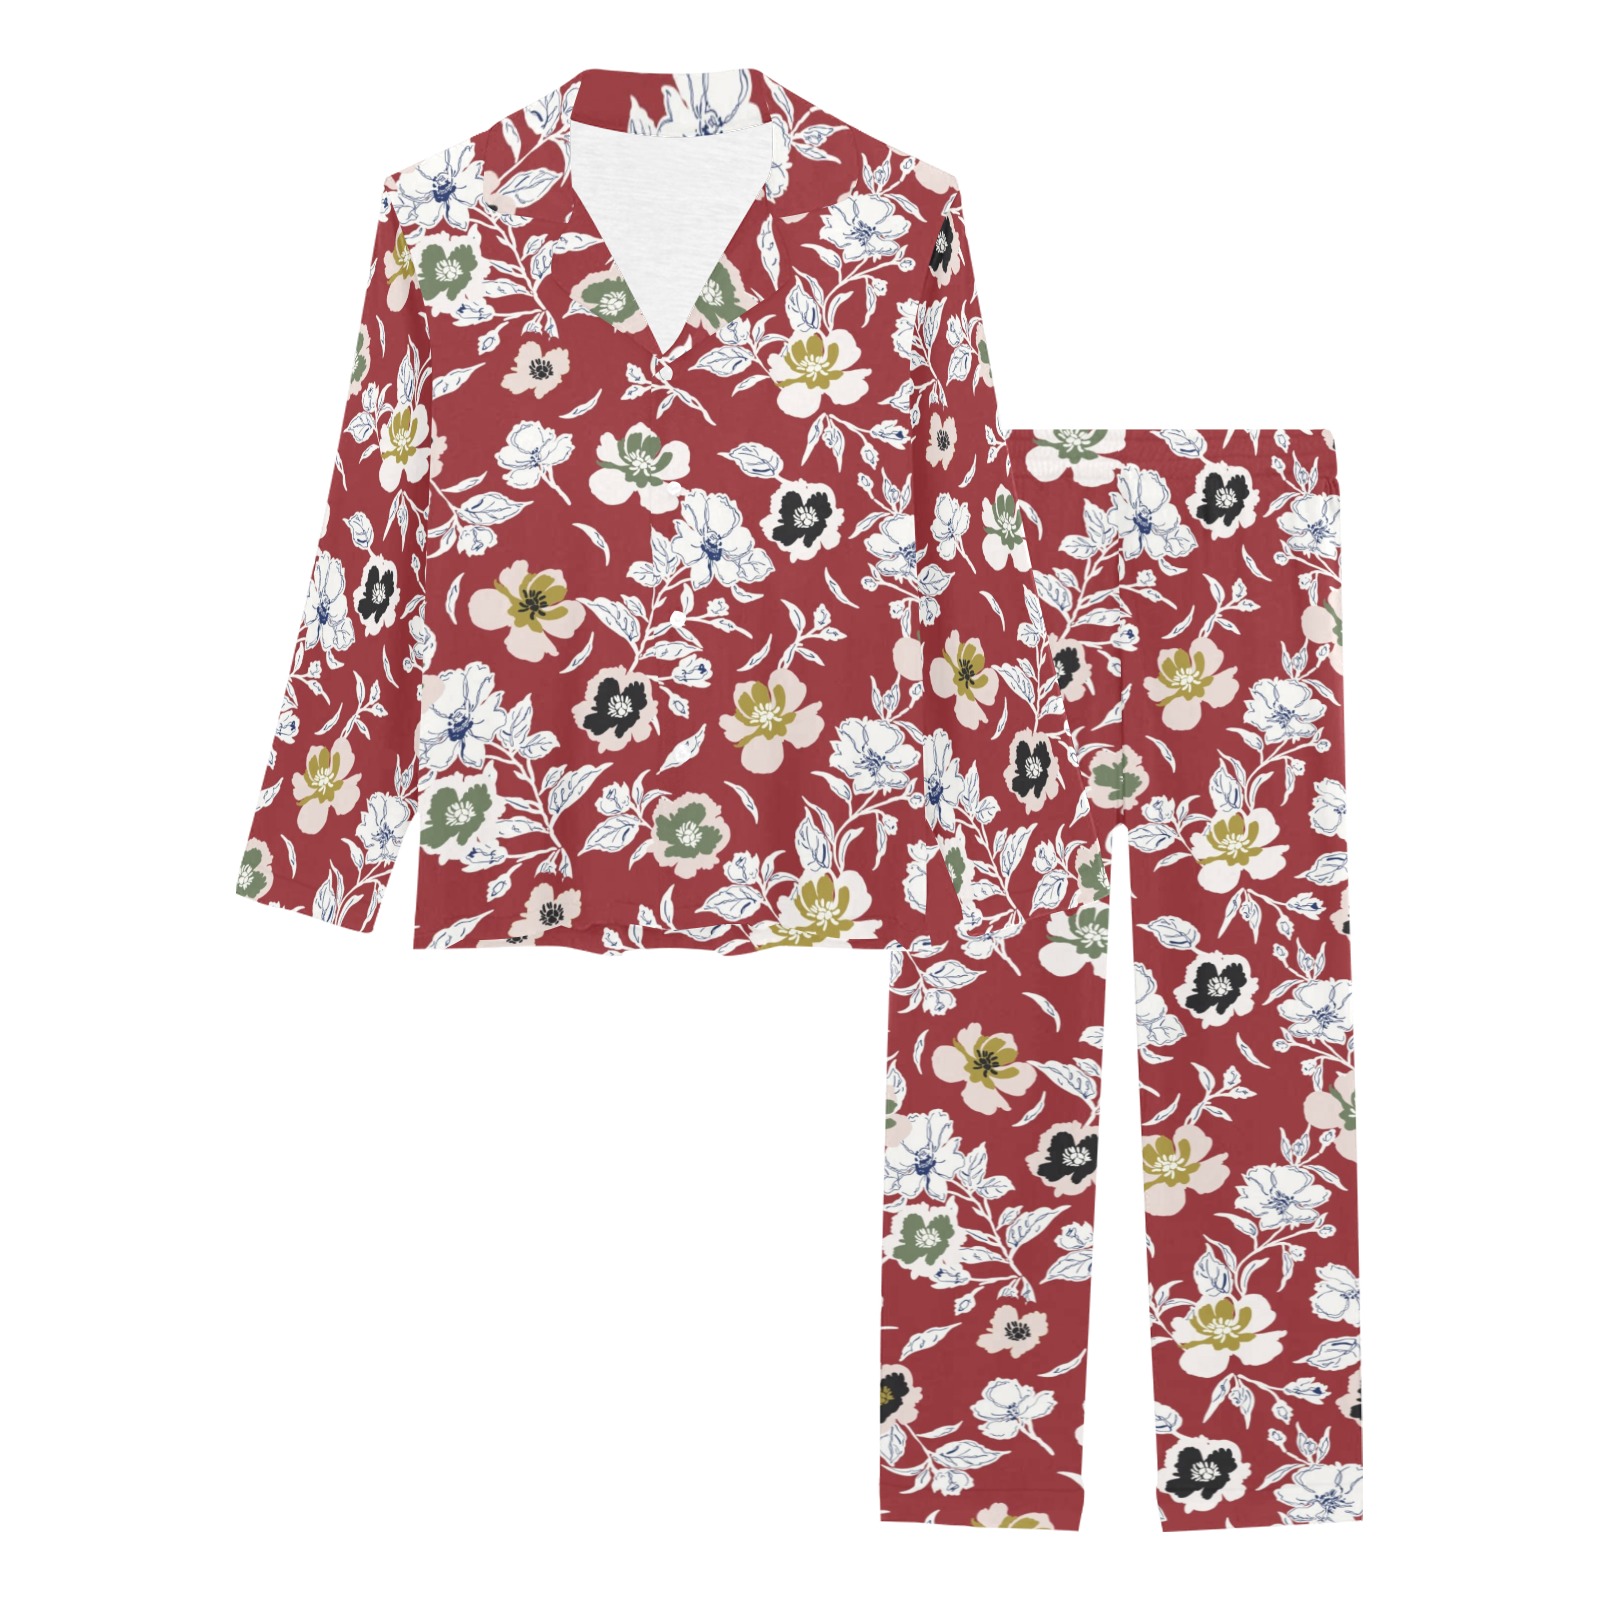 Flowers abstract red garden DPMF Women's Long Pajama Set